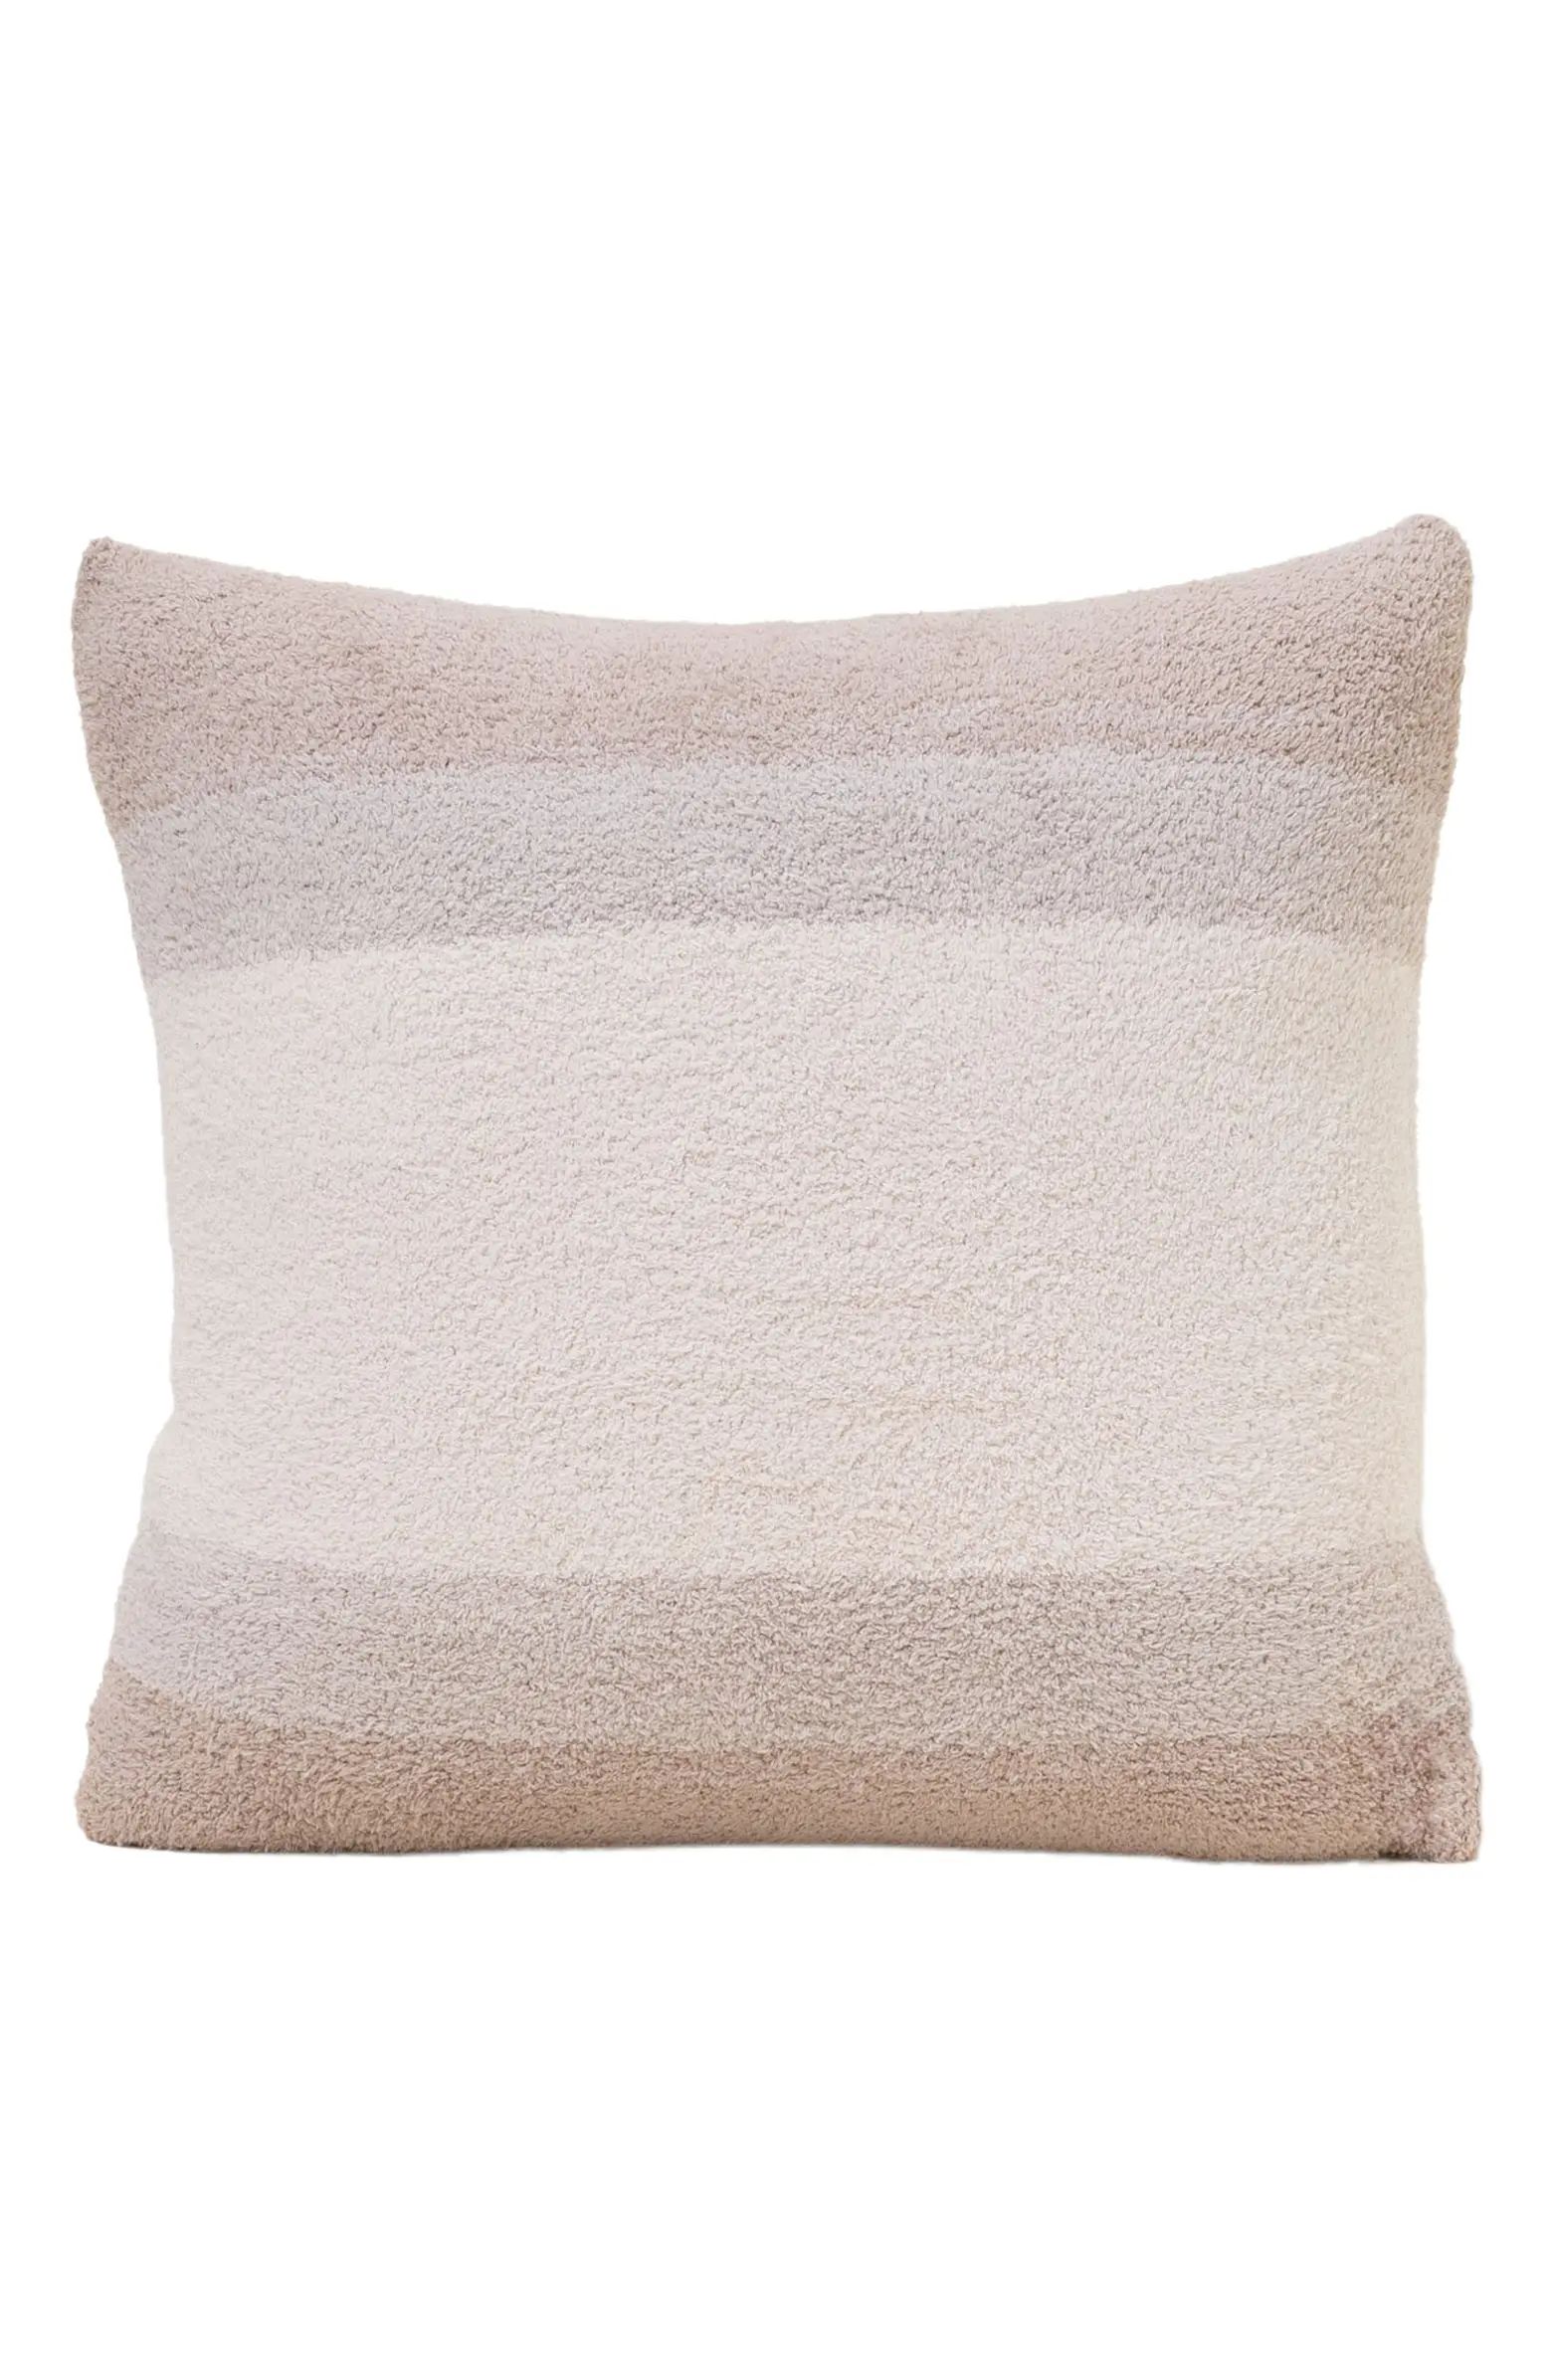 Barefoot Dreams® CozyChic® Pillow | Nordstrom | Nordstrom